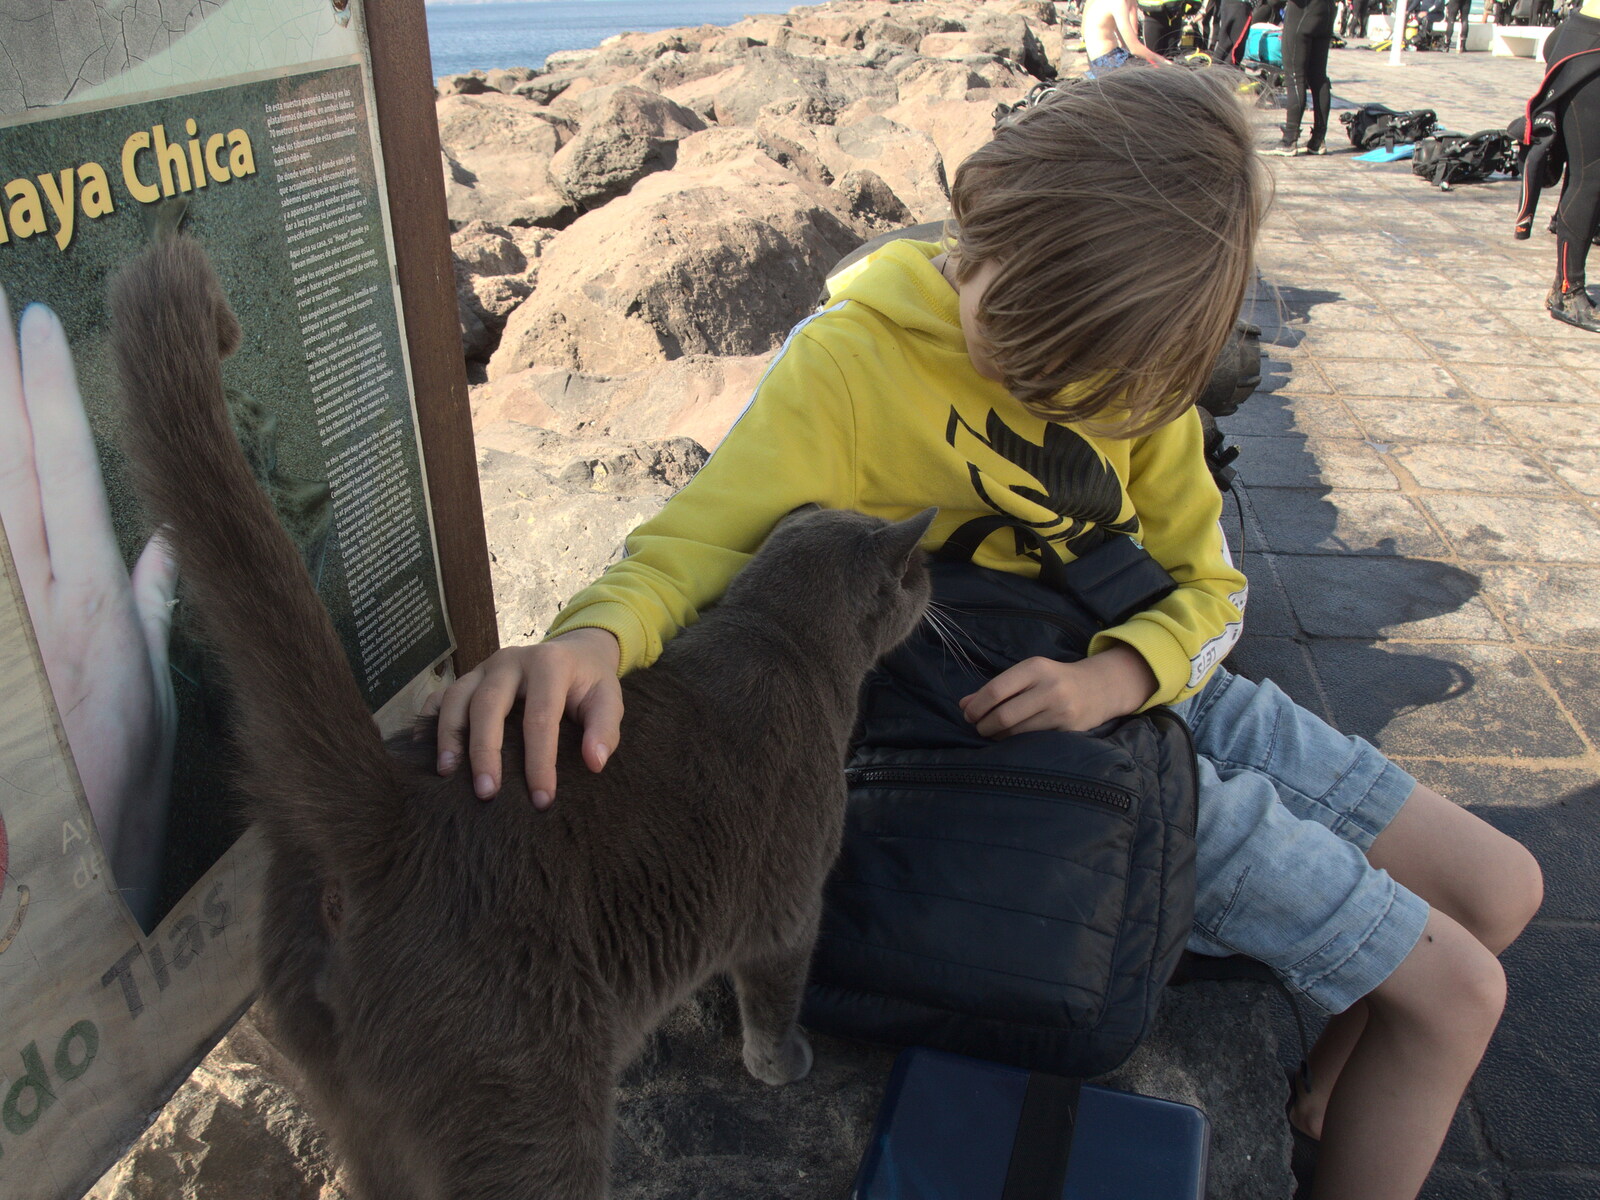 Harry interacts with the resident grey cat from The Volcanoes of Lanzarote, Canary Islands, Spain - 27th October 2021